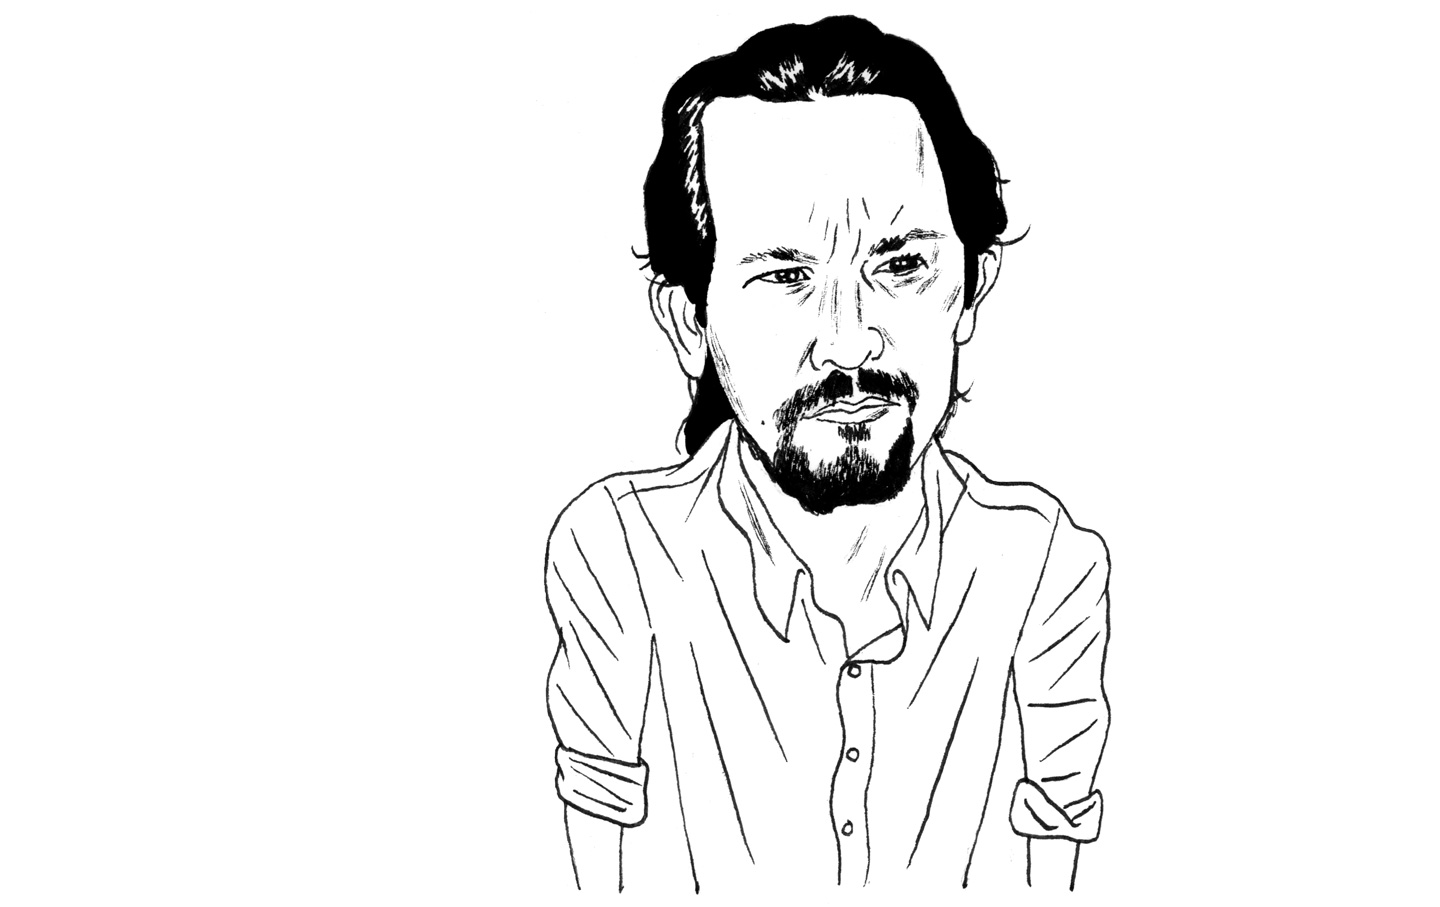 ‘The Menace Is Inequality’: A Conversation With Podemos’s Pablo Iglesias